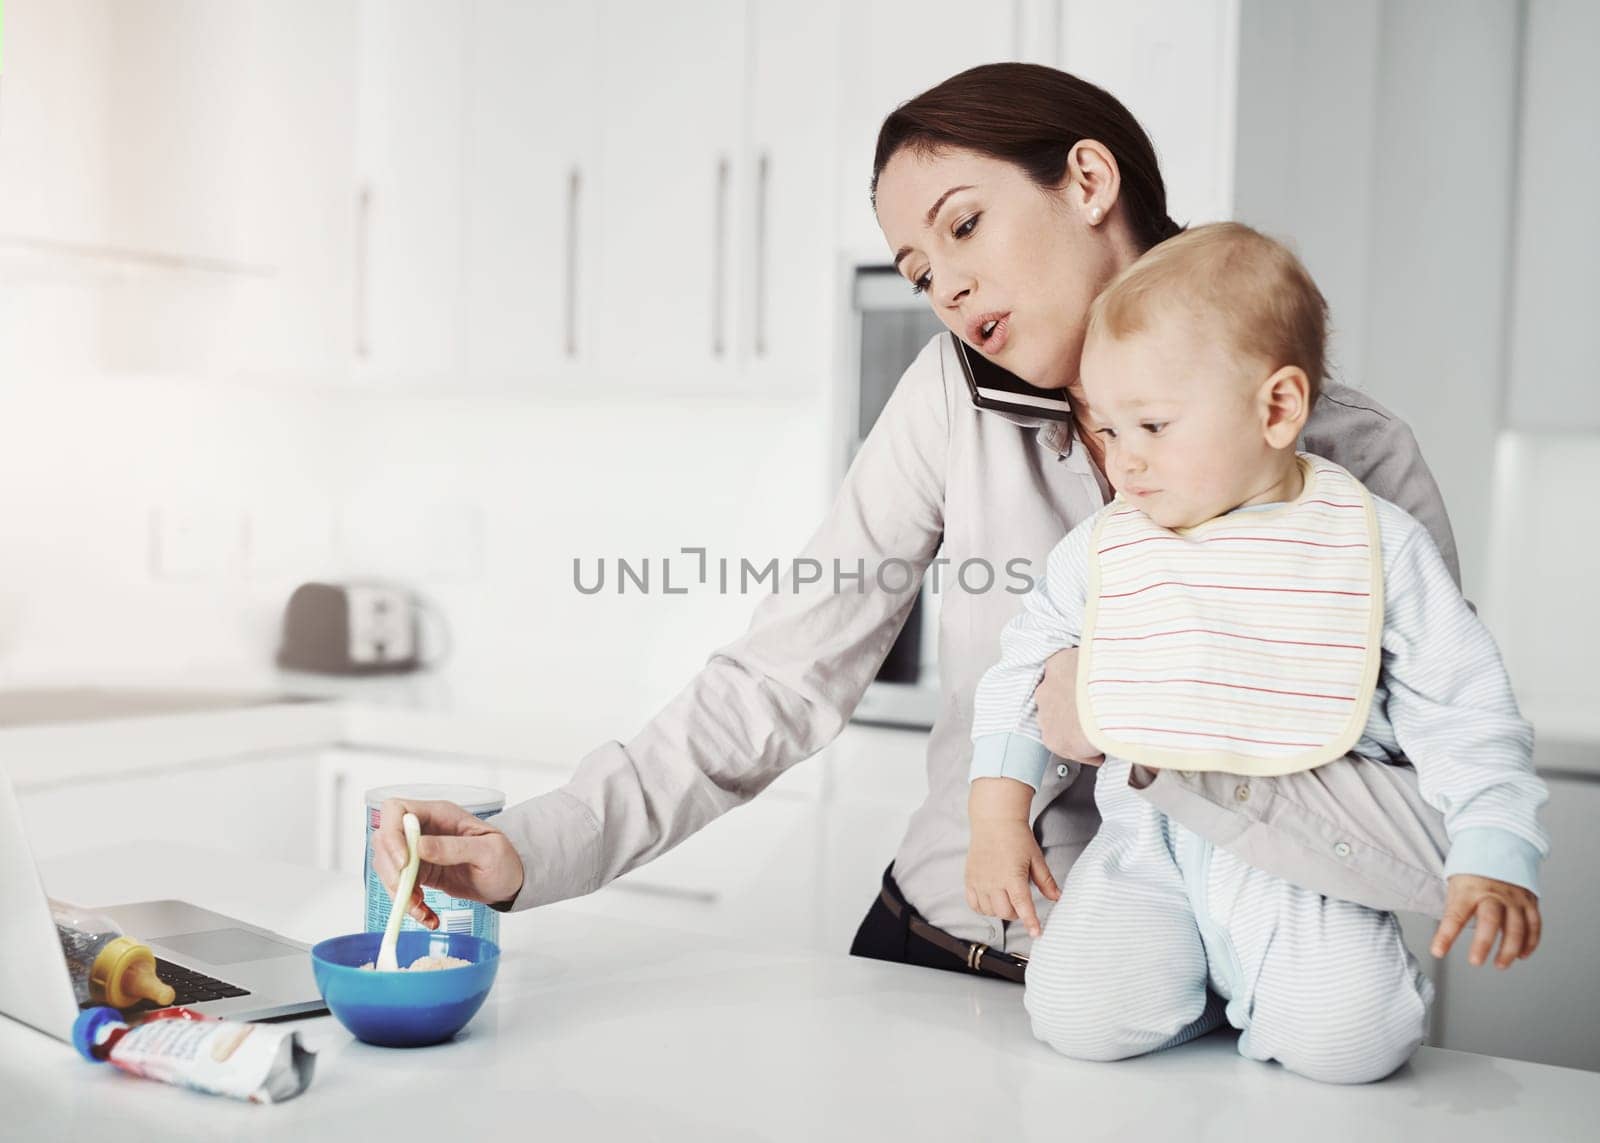 Family, baby and mother with multitasking, home and phone call with stress, feeding toddler and burnout. Mama, female parent and infant in the kitchen, smartphone and communication with frustration.